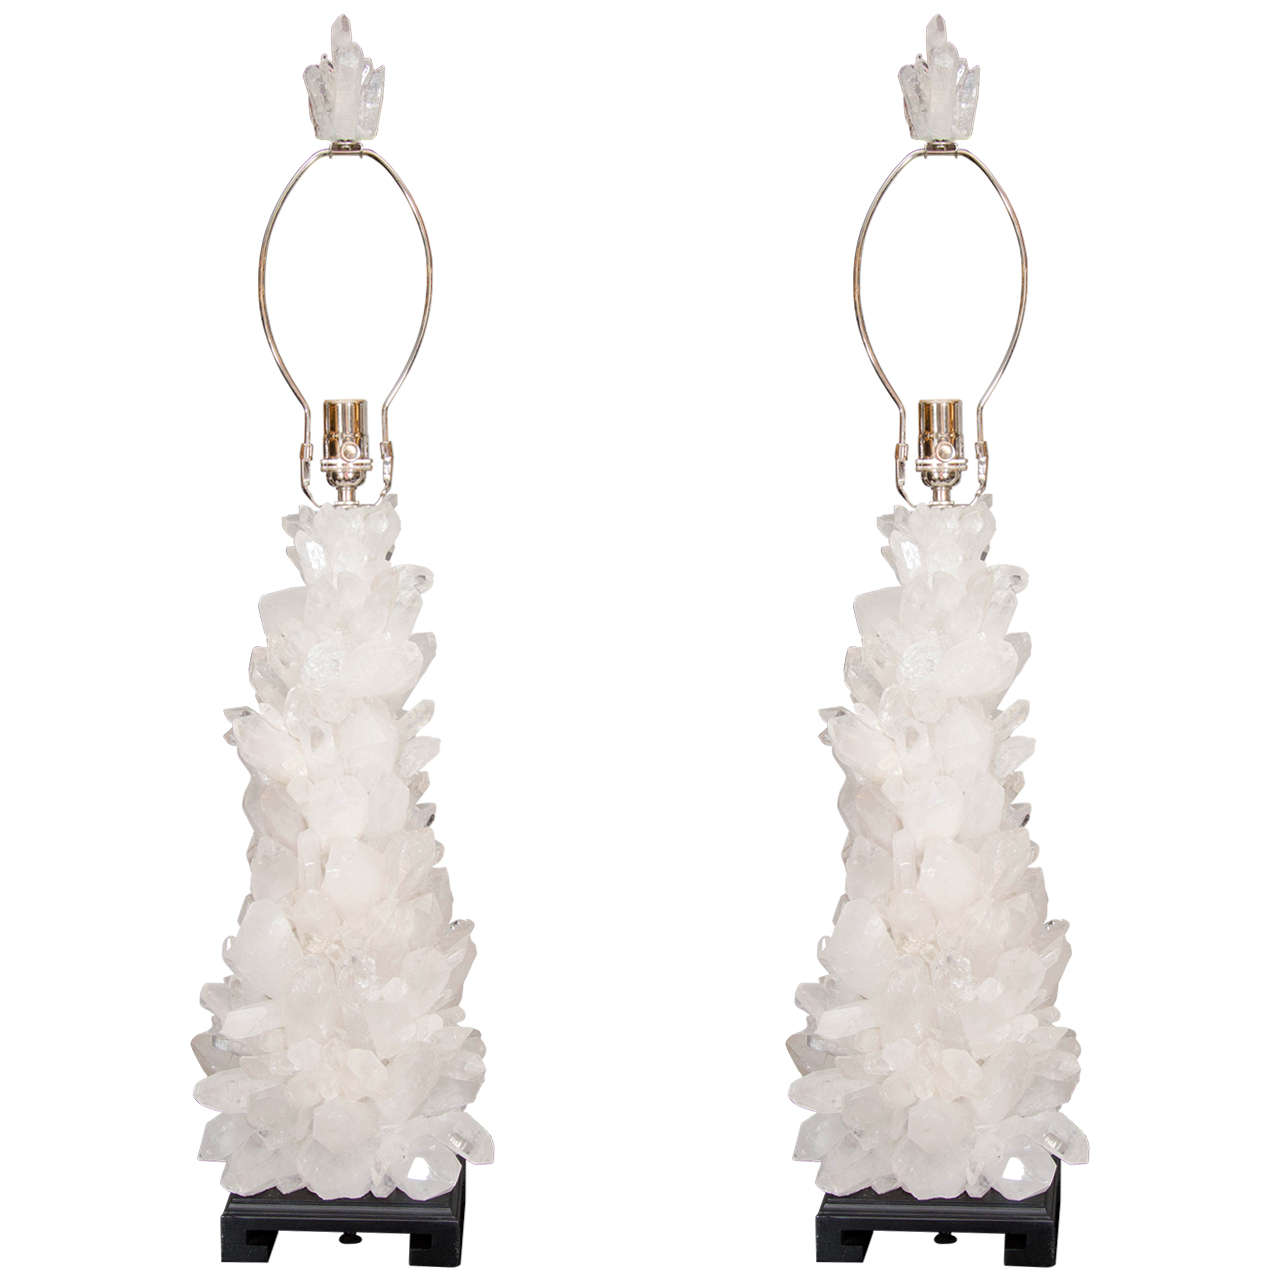 Pair of Custom Clear Quartz Crystal Lamps with Ebony Bases